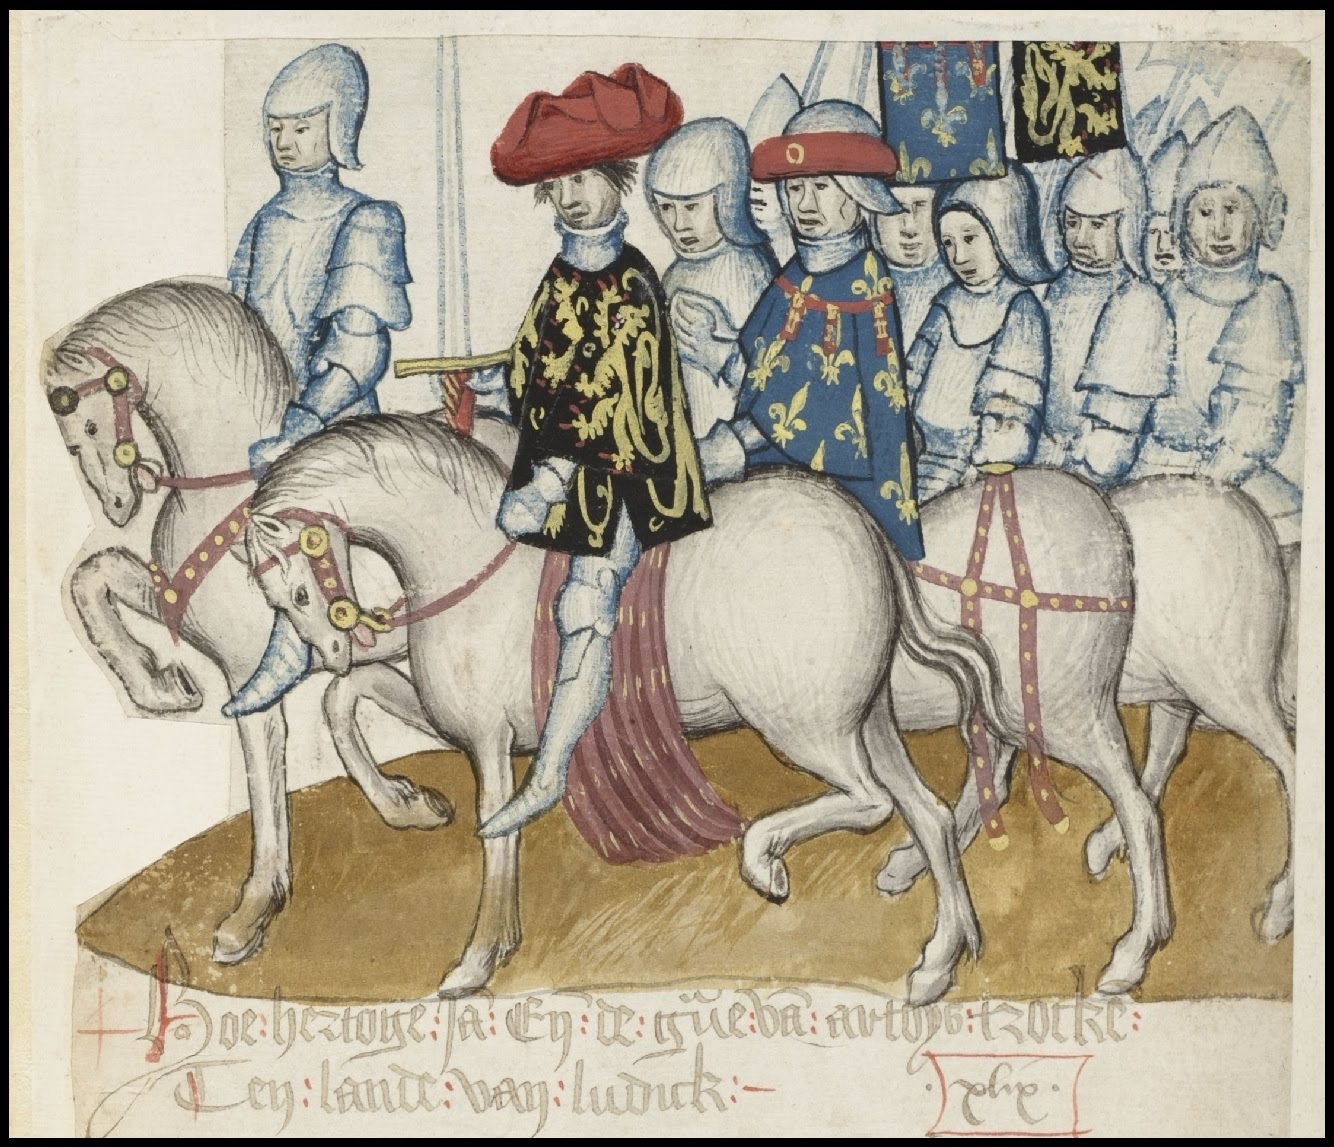 medieval nobles and soldiers riding horses